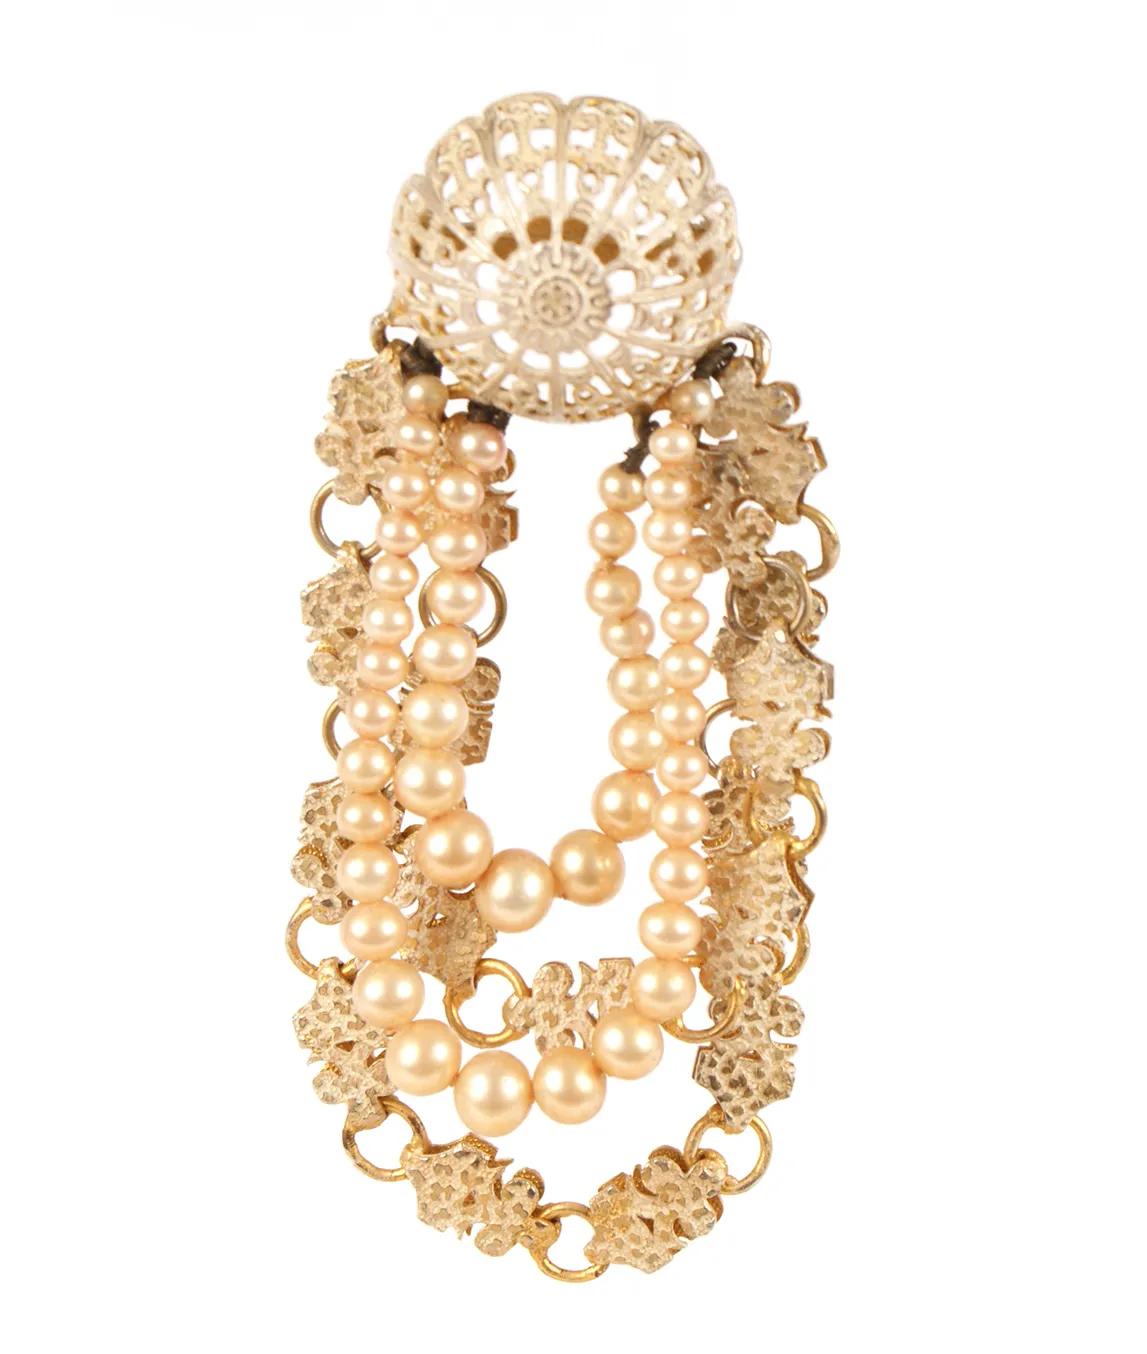 Mitchel Maer for Christian Dior pearl brooch pin